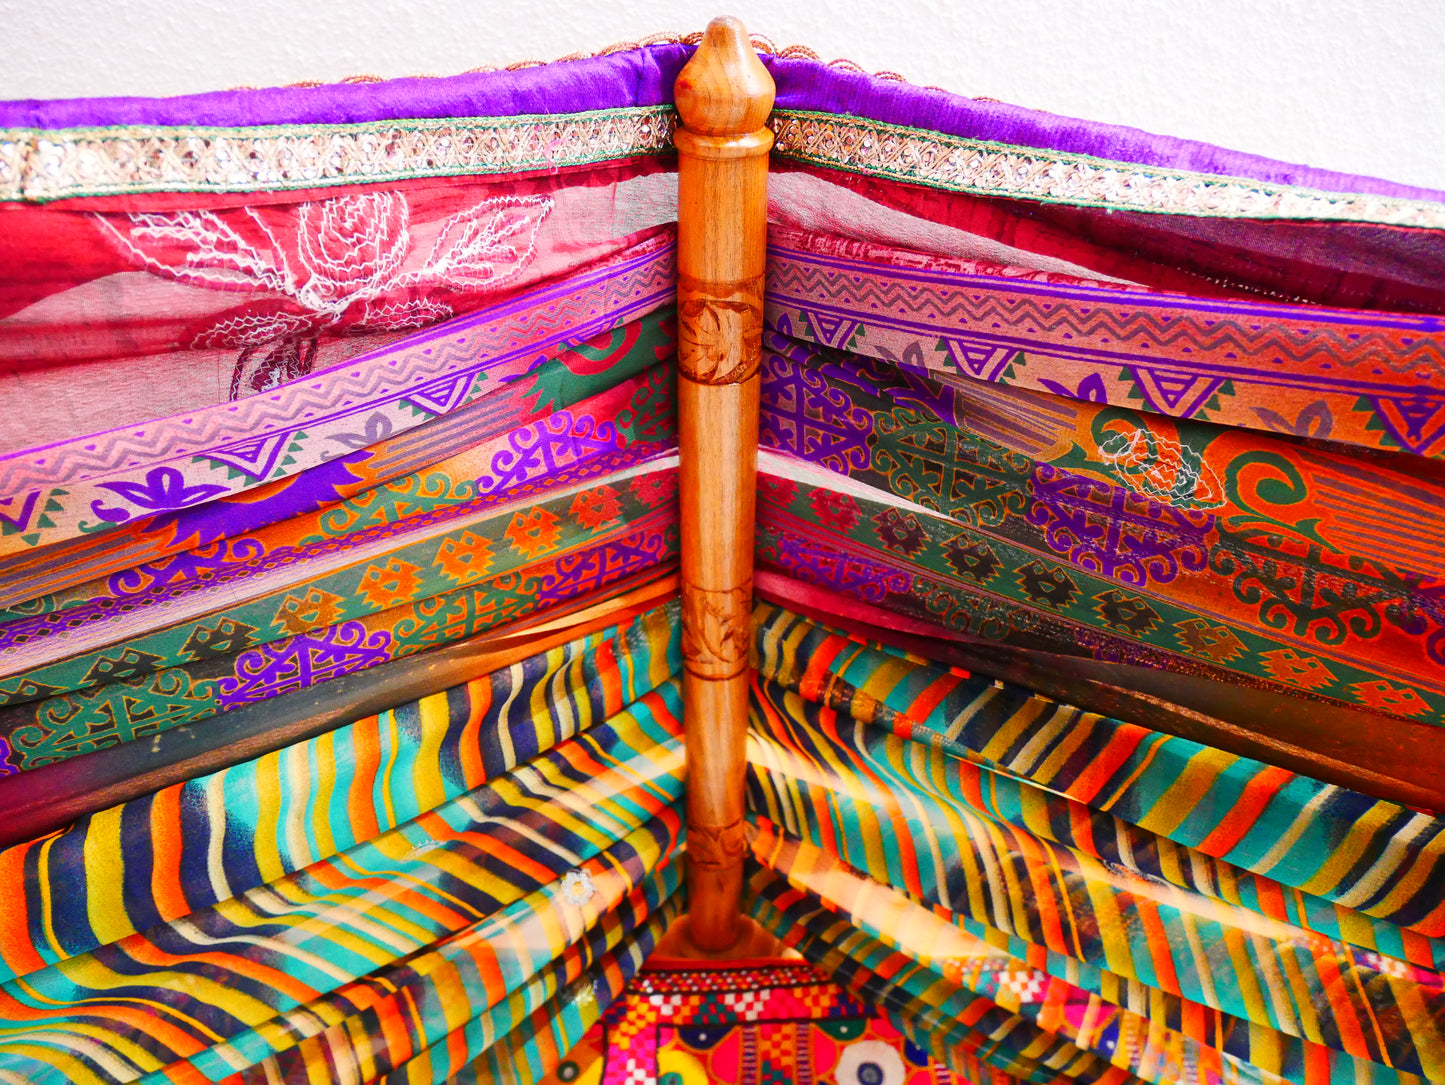 Colorful bed canopy - custom made saree canopy frame with handcrafted walnut wood rods | bed curtains - meditation space